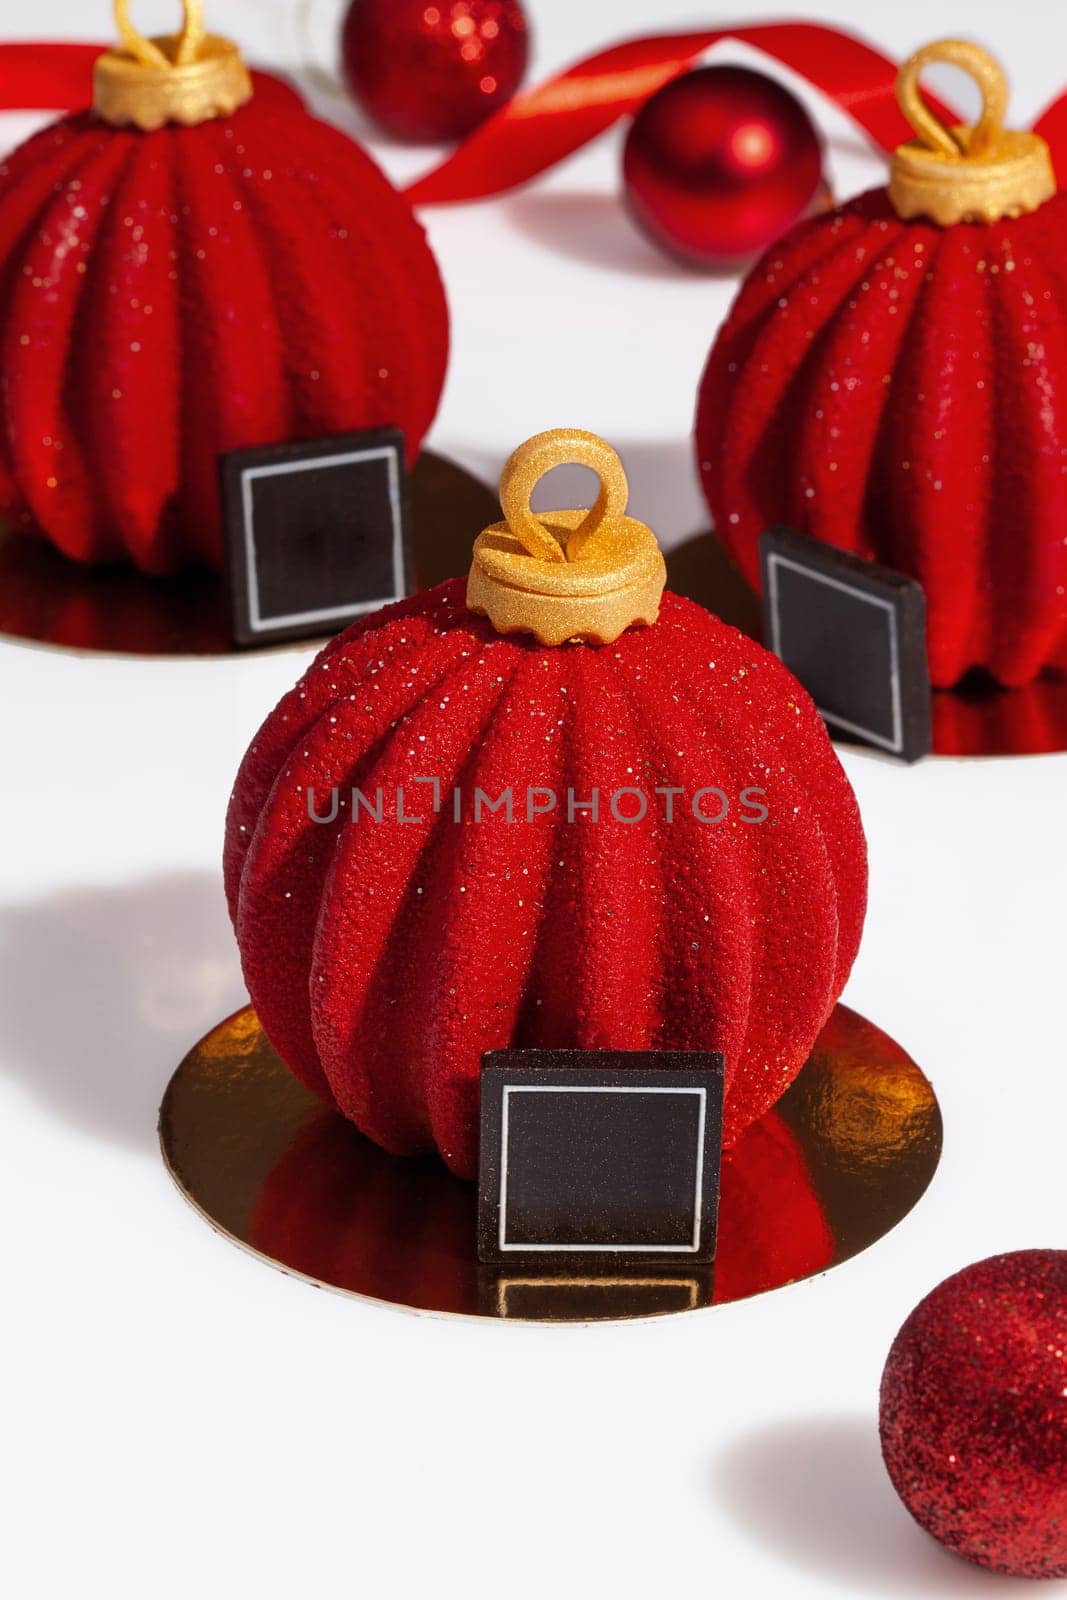 Delicious treats for New Year celebration. Handmade authors desserts in shape of red glazed Christmas balls on golden serving cardboard. Festive mood concept